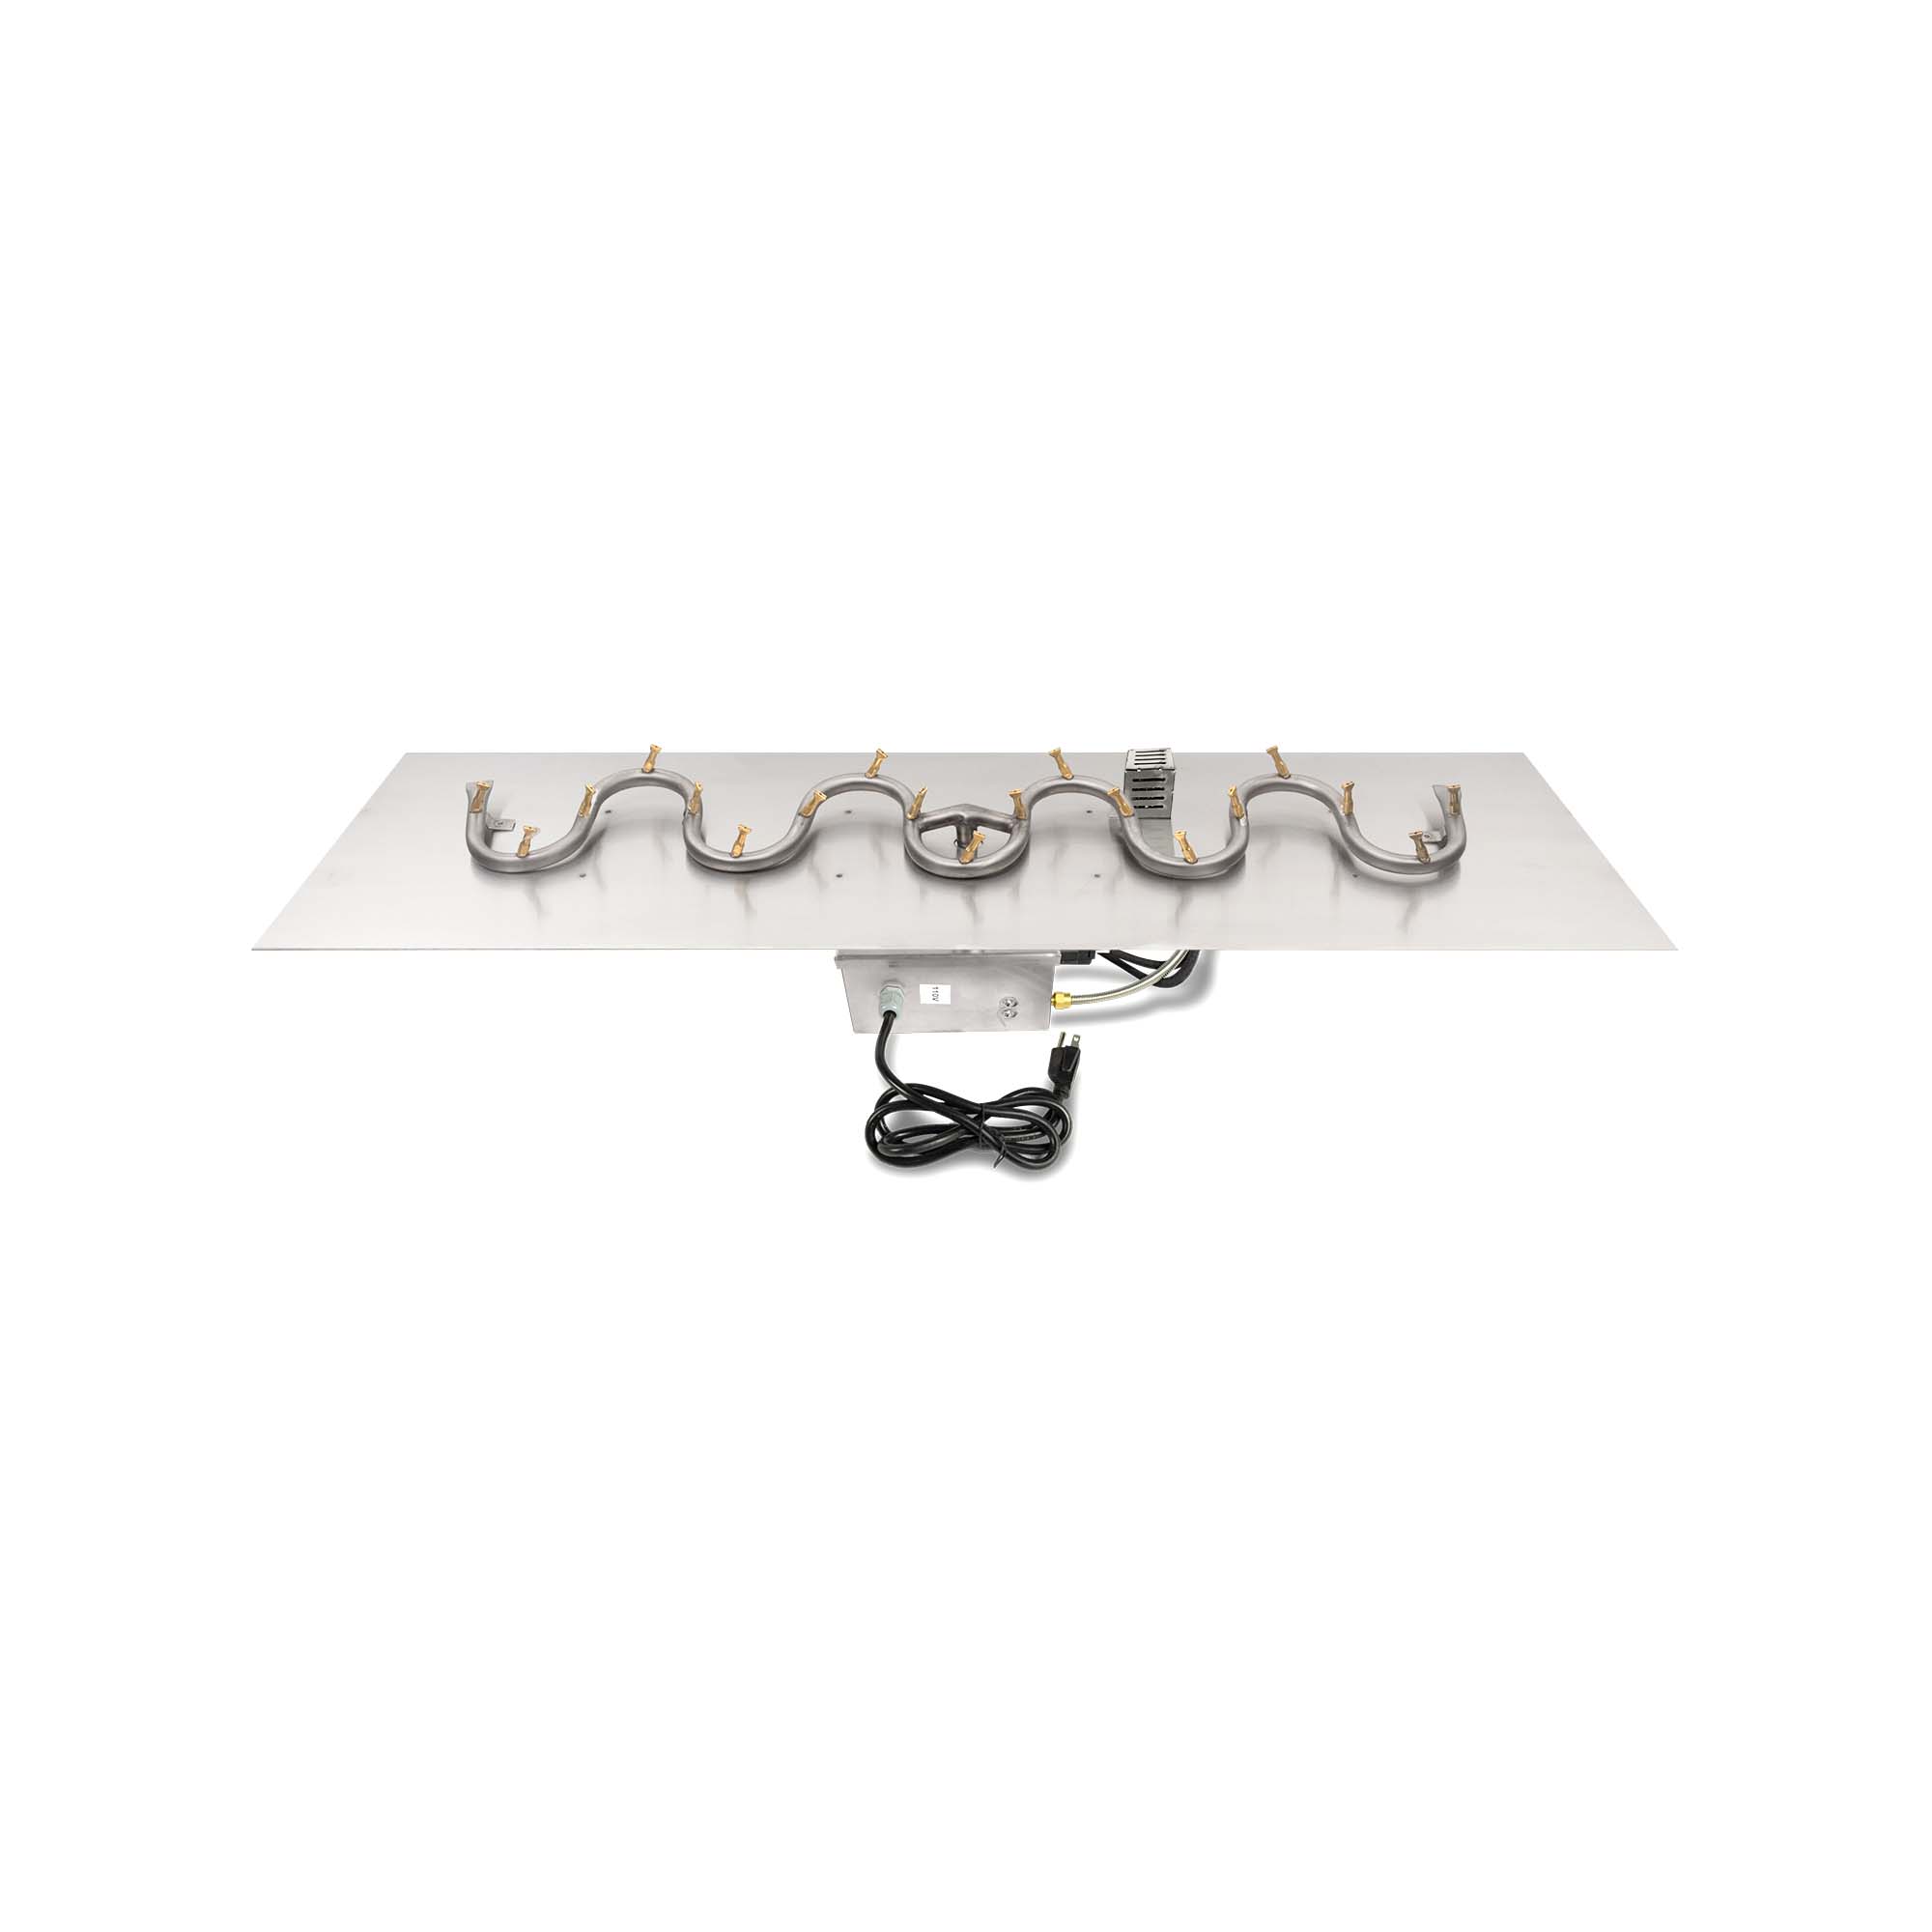 The Outdoor Rectangular Flat Pan with Stainless Steel Switchback Bullet Burner